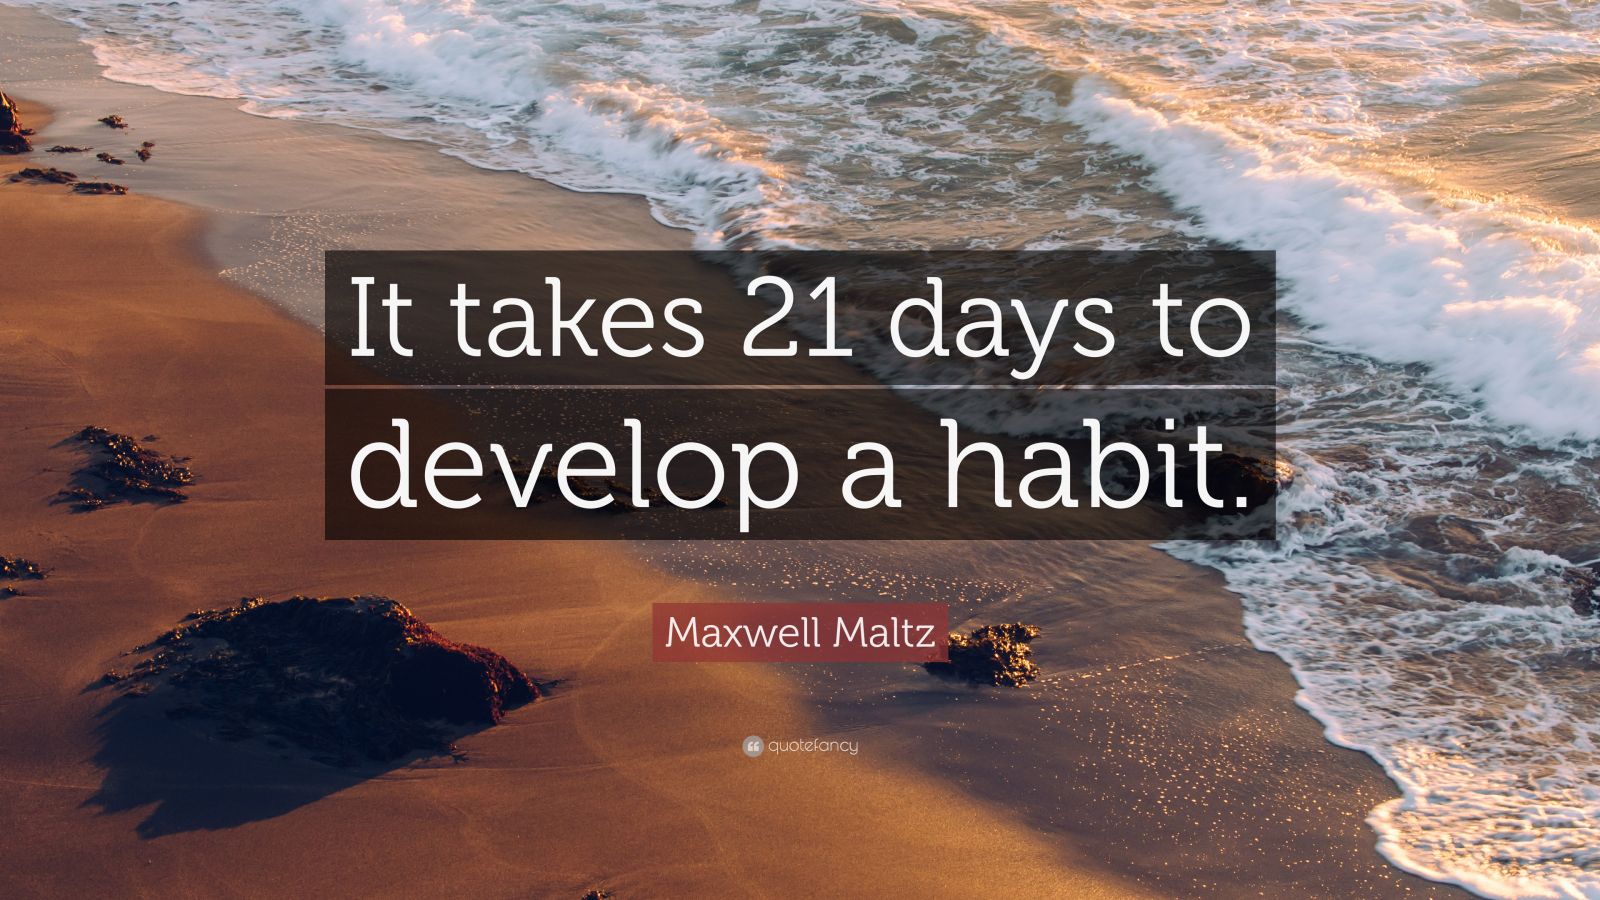 maxwell-maltz-quote-it-takes-21-days-to-develop-a-habit-9